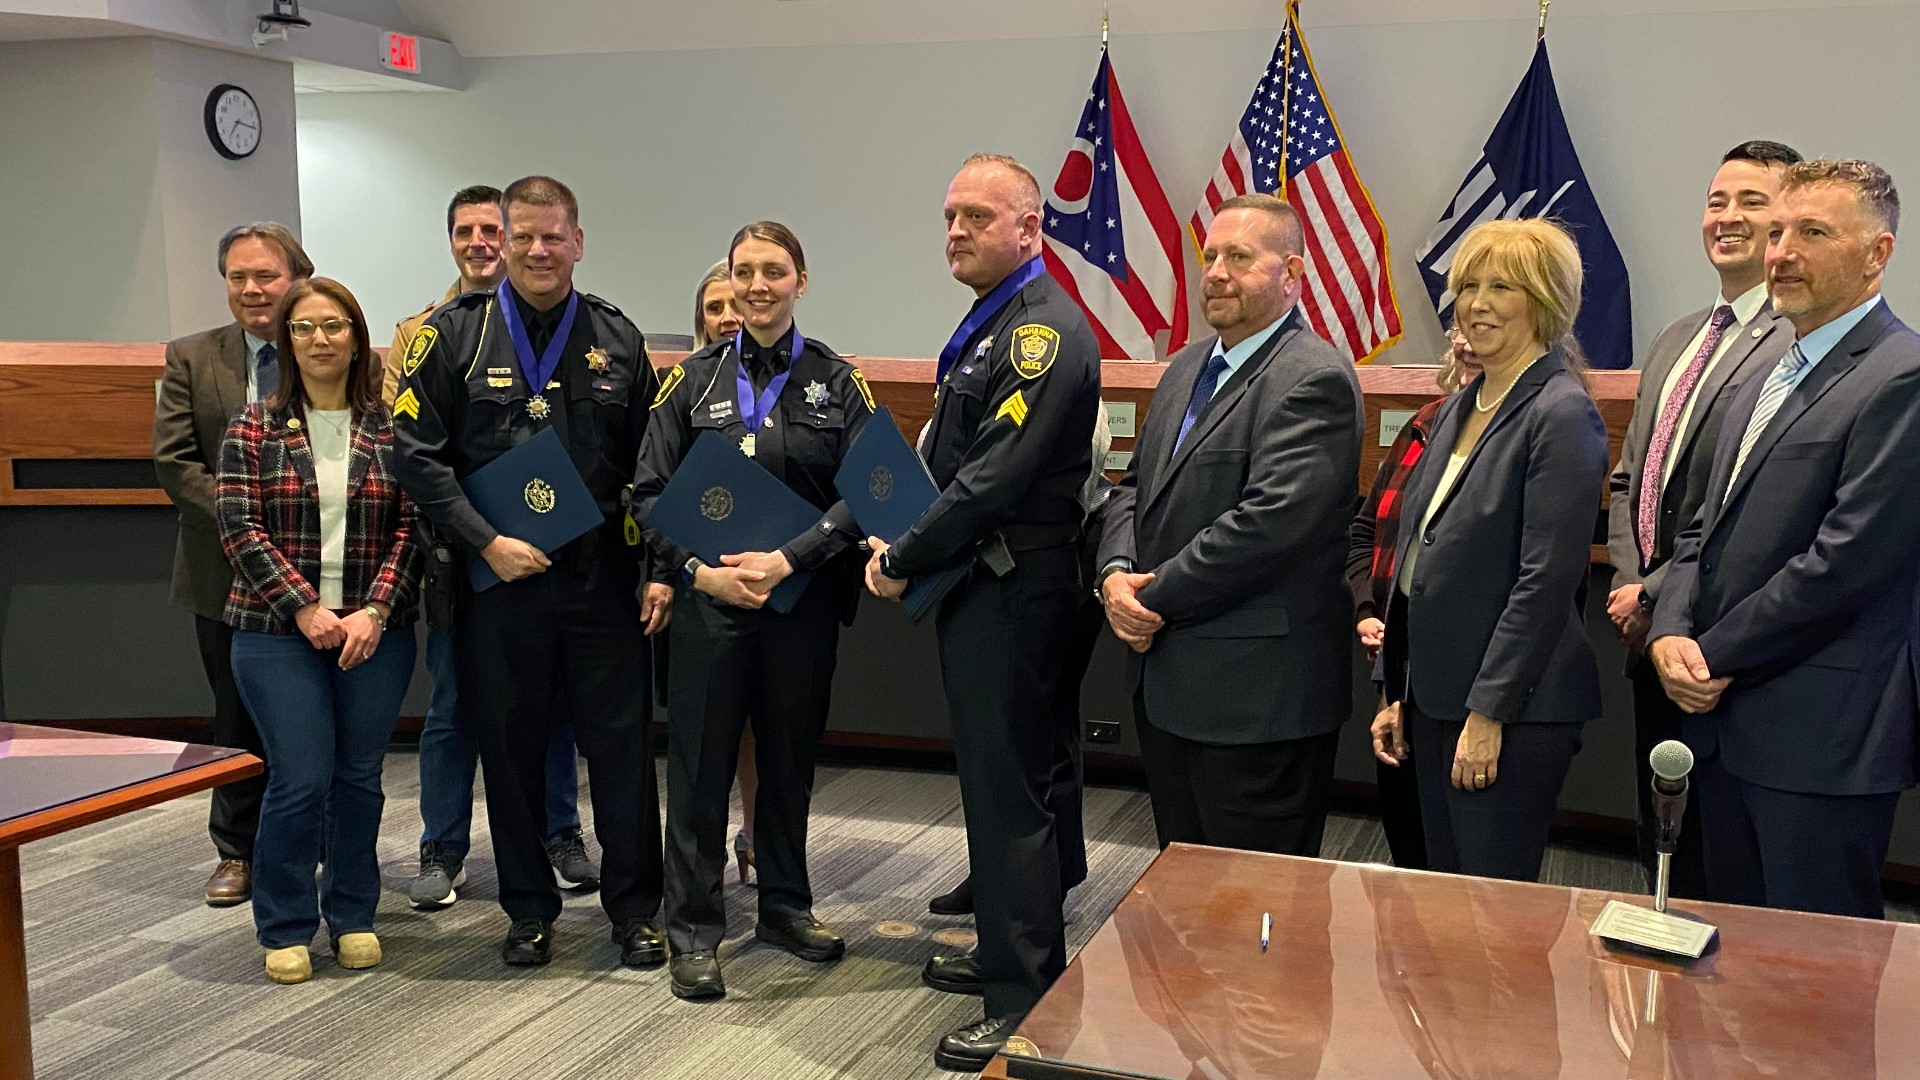 Sgt. Justin Sheasby, Sgt. Kyle Parrish, and Officer Kaylea Pertz were honored at the Gahanna City Council meeting Monday night.